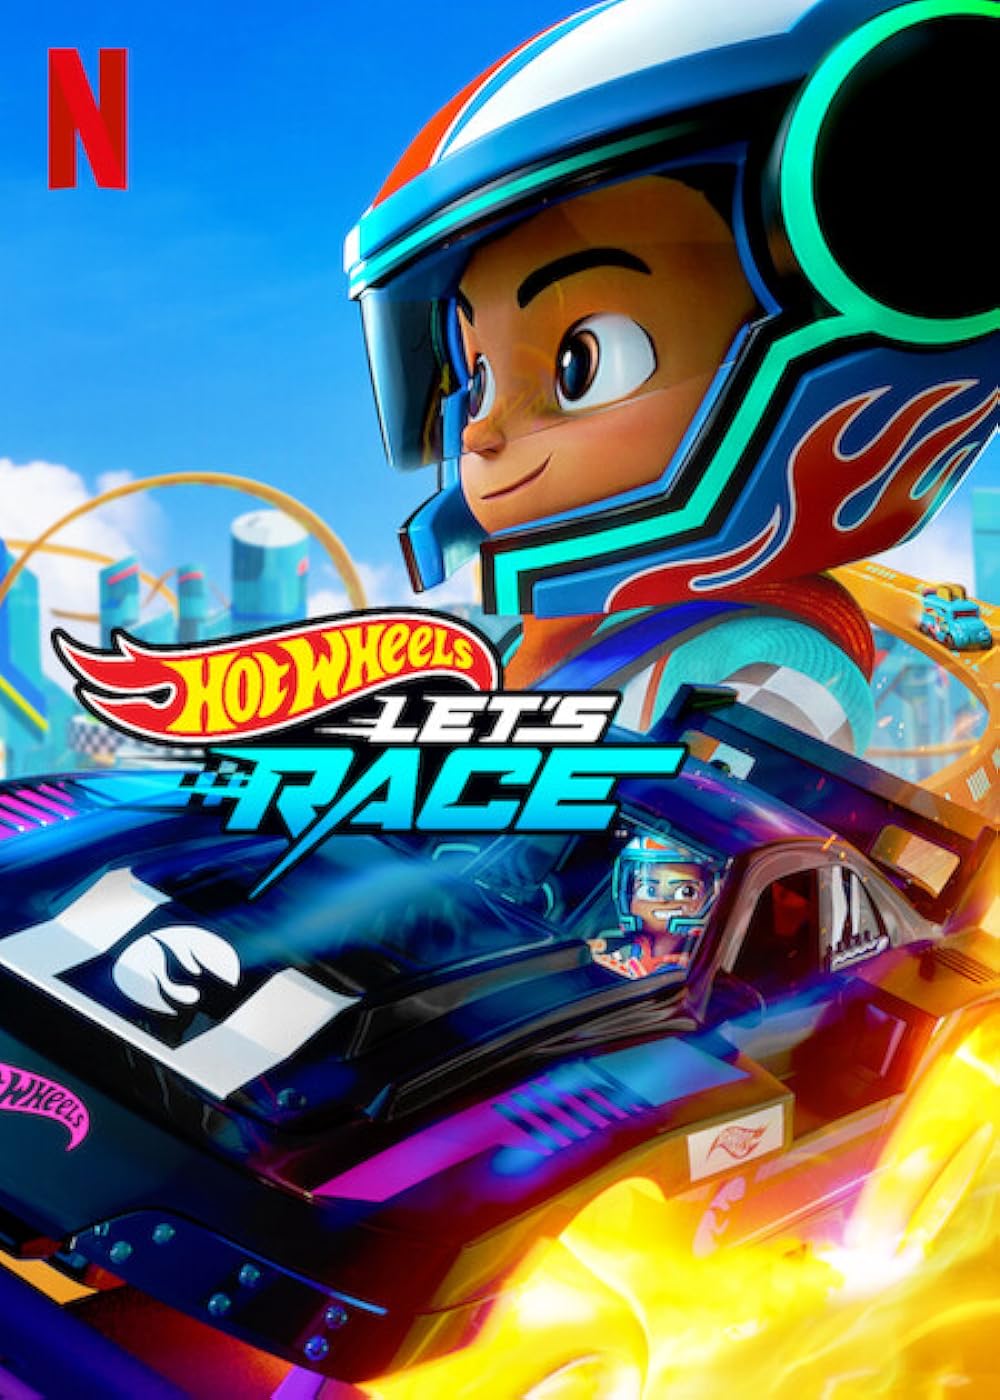 Hot Wheels Lets Race 2024 S01 Complete Hindi ORG Dual Audio 1080p | 720p | 480p HDRip ESub Download